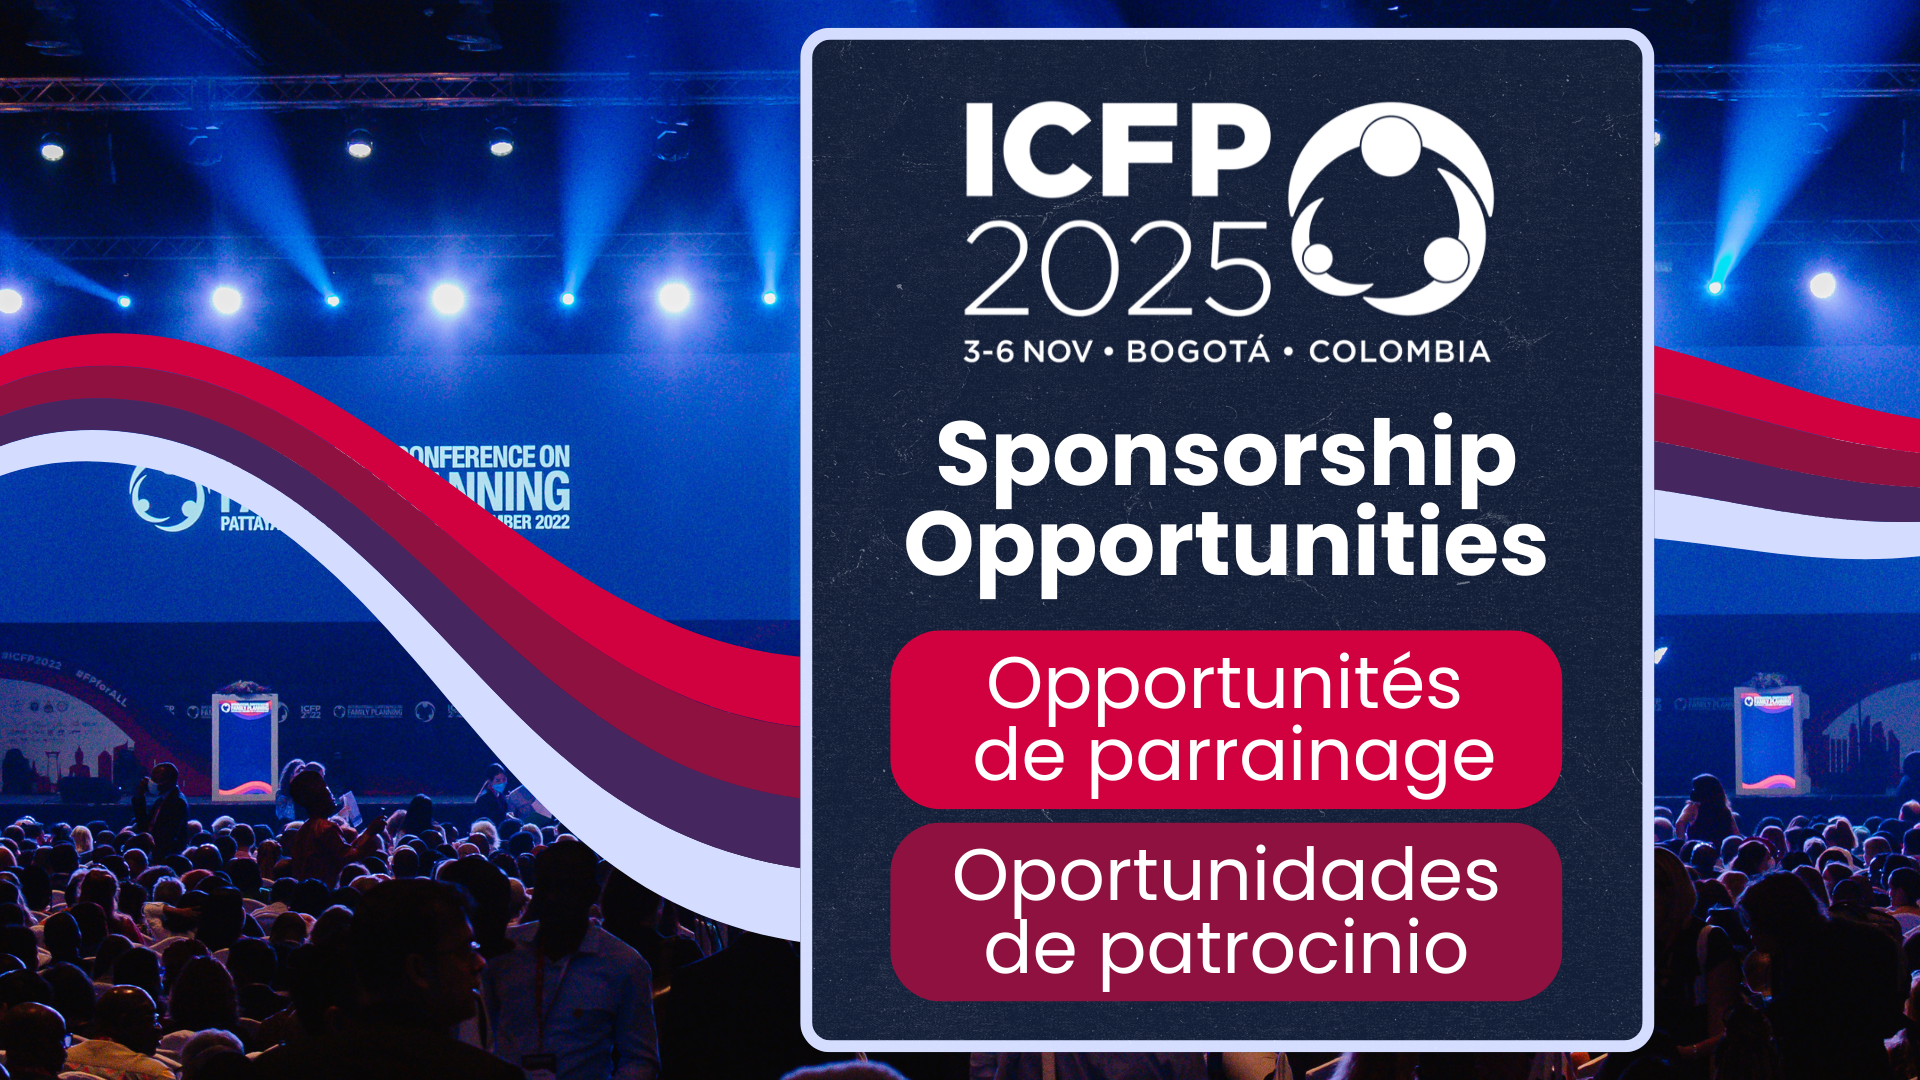 ICFP 2025 Unveils New Sponsorship Benefits and Opportunities